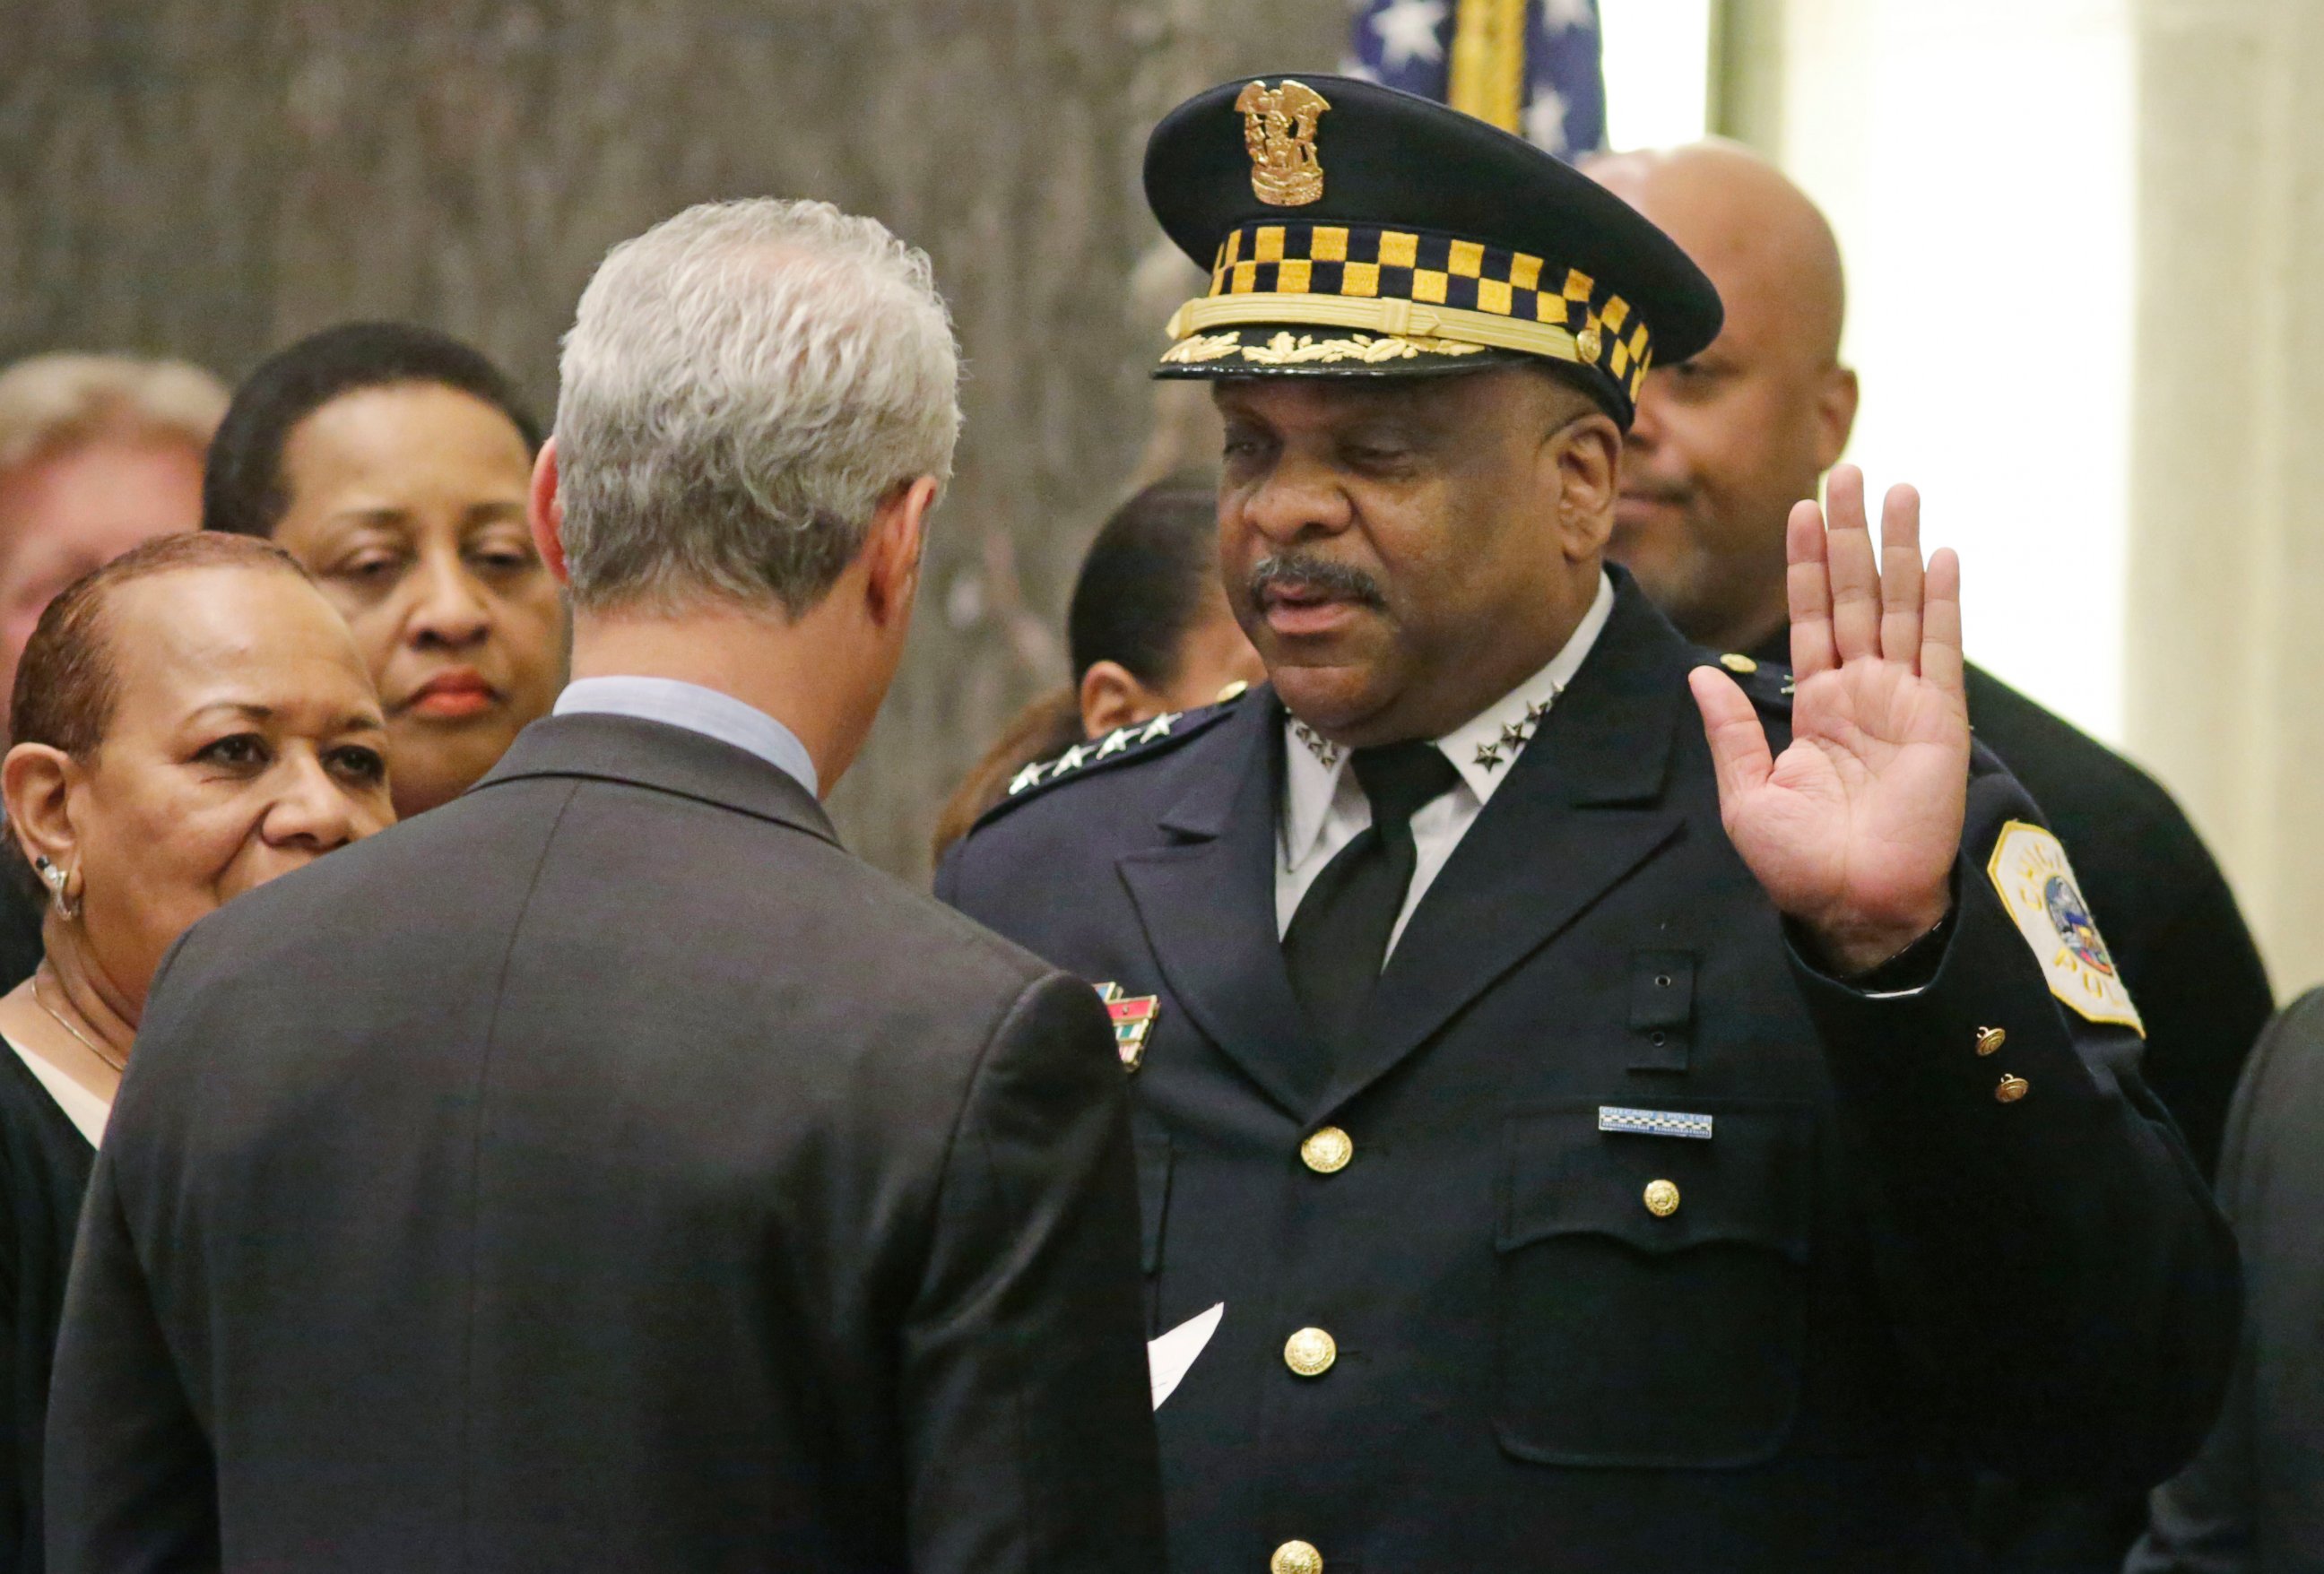 Chicago Mayor Rahm Emanuel swears in Eddie Johnson as the new Chicago police superintendent at a city council meeting, April 13, 2016, in Chicago.